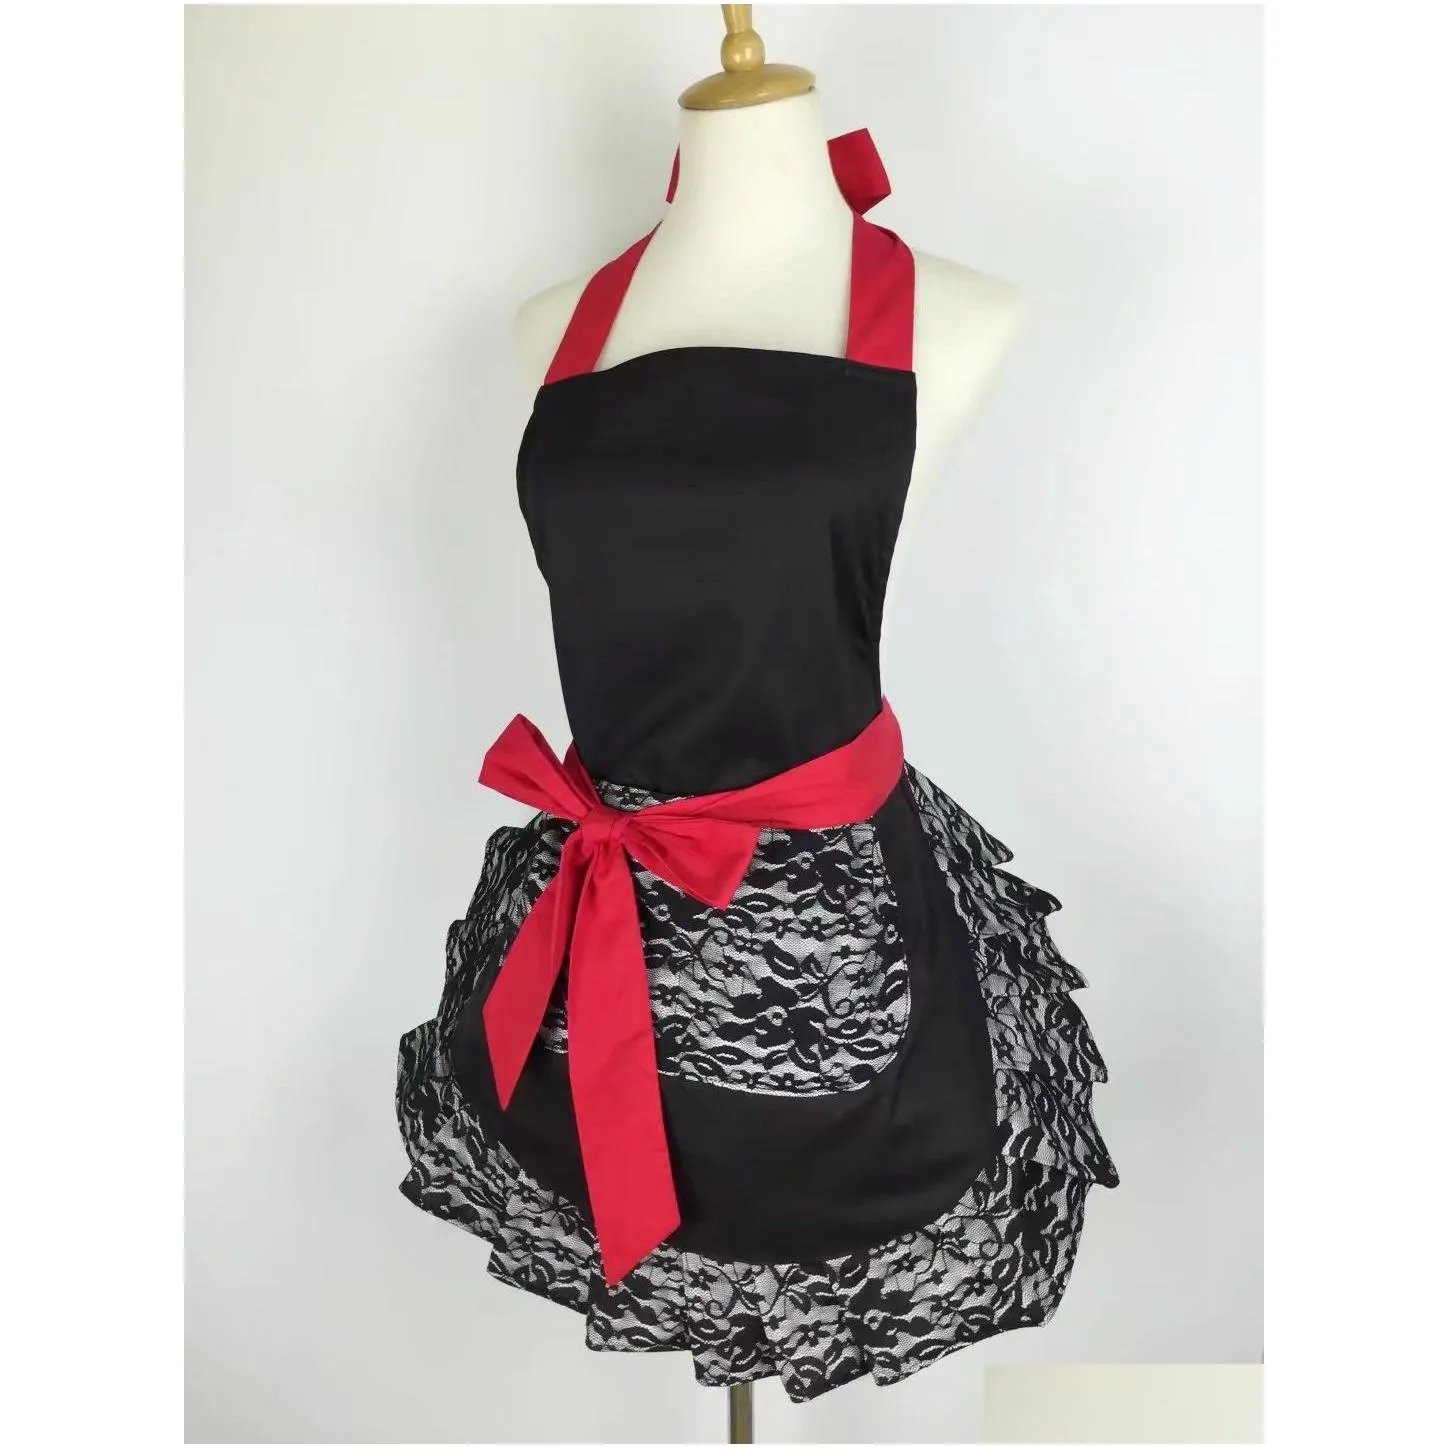 Aprons Lace Aprons For Women Lady Cotton Apron With Adjustable Neck Strap Long Ties Kitchen Cooking Home Baking 70Cm 138 Home Garden H Dhnjw